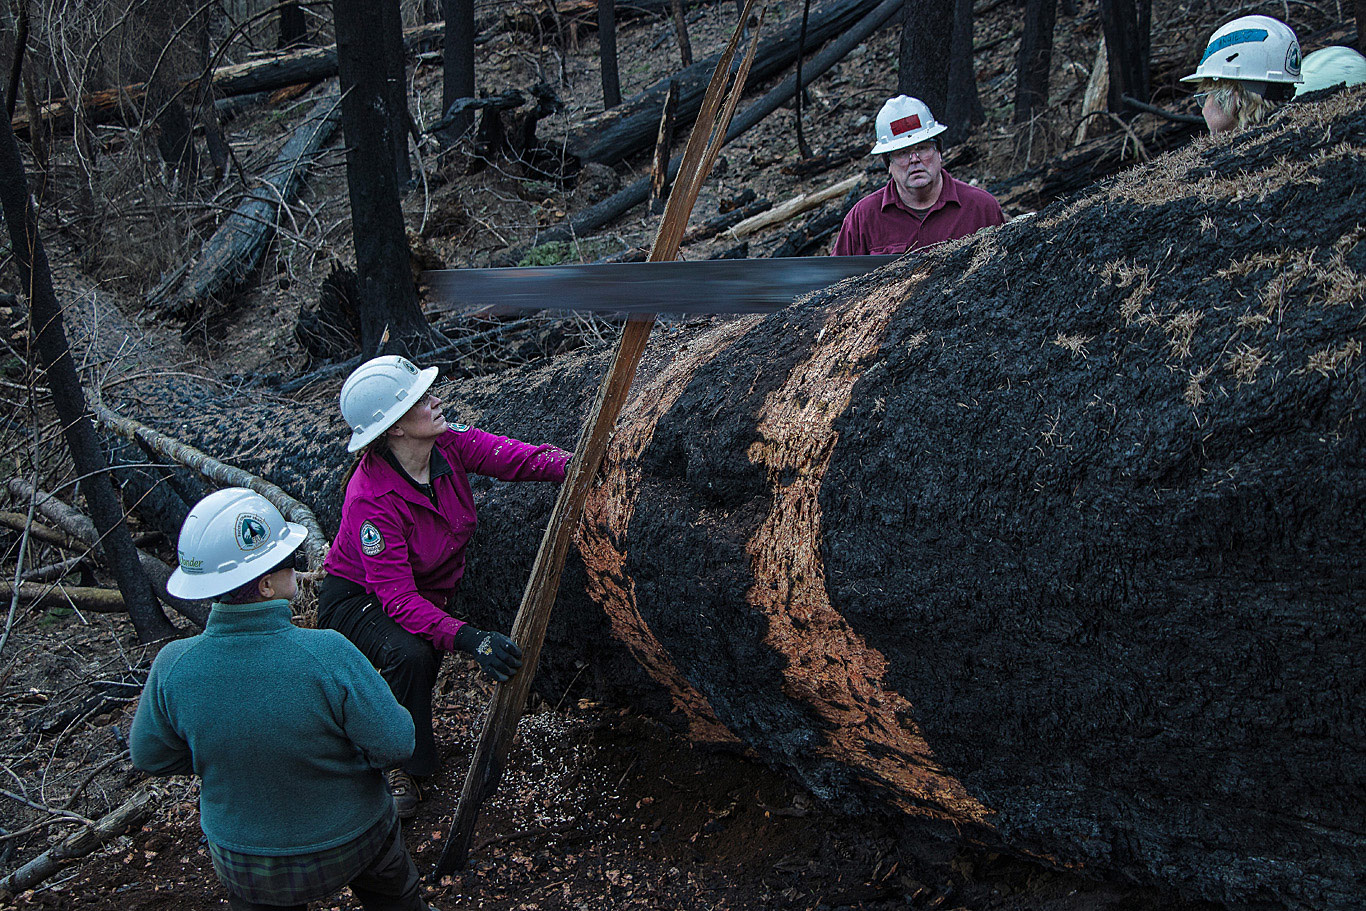 Over many months, PCTA Mt. Hood Chapter volunteers tackled a huge number of projects in the burn area. Here they are on just one of the massive logs that they cleared off of the Gorge's trails. Photo by Terry Hill